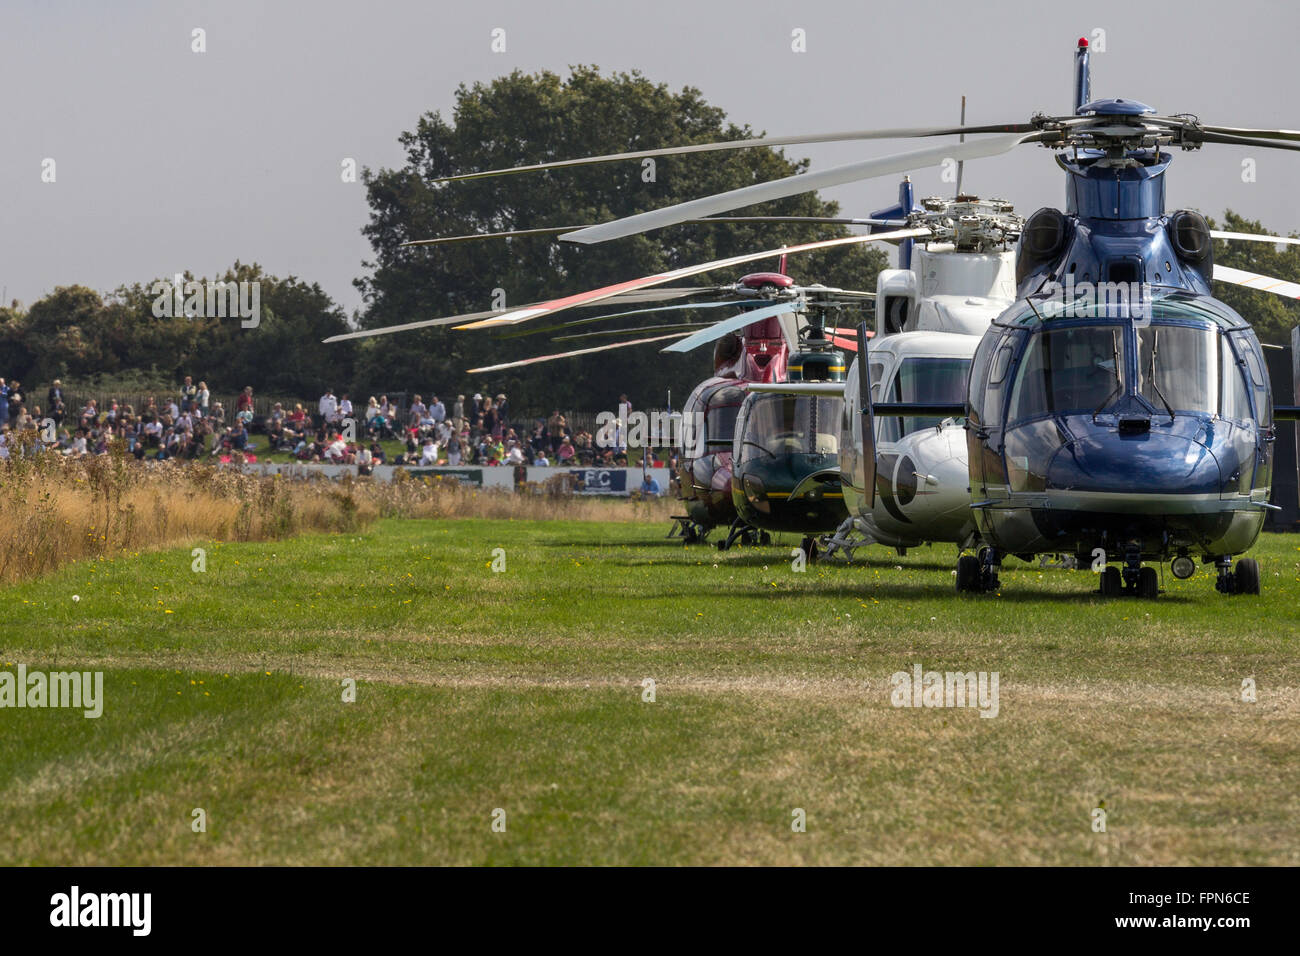 Helicopters in a row at Goodwood Revival Stock Photo